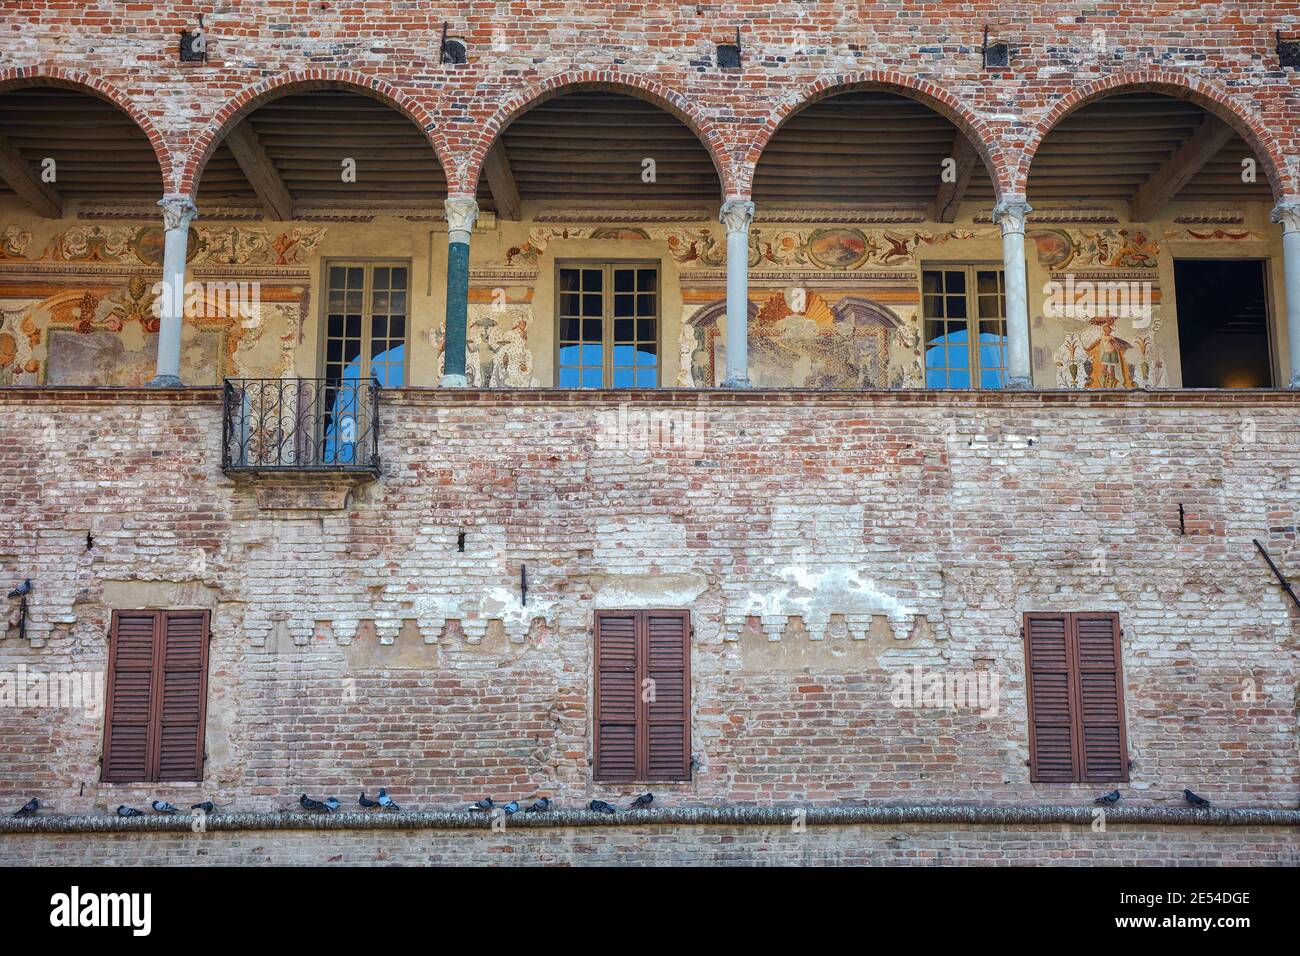 Frescoes painted on a balcony of the Rocca Sanvitale Castle, a fortress in Fontanellato, Parma, Italy. Stock Photo